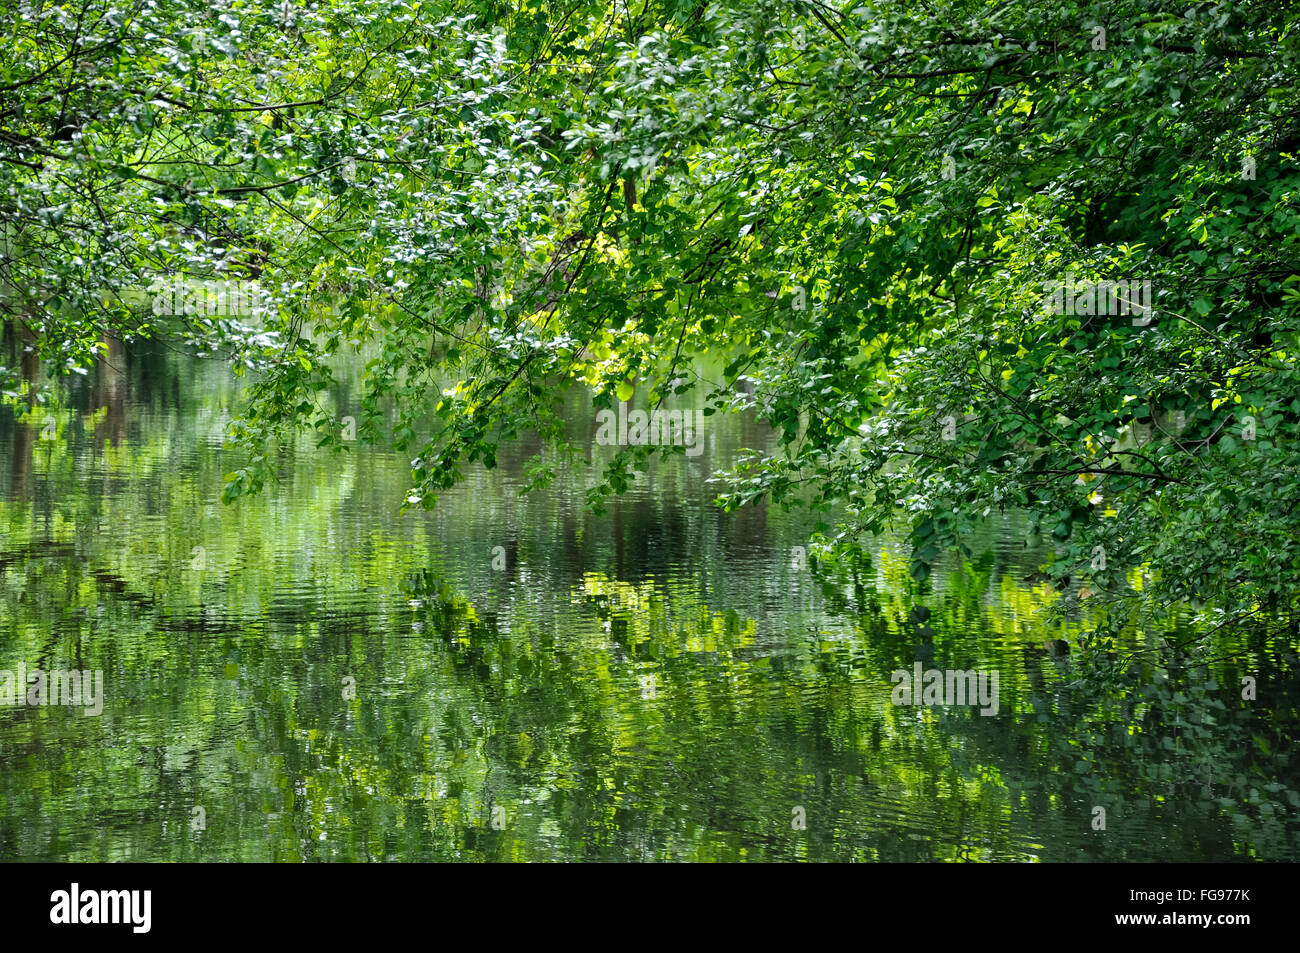 Reflections of greenery in the river Wye near Cressbrook in Derbyshire, England. Stock Photo